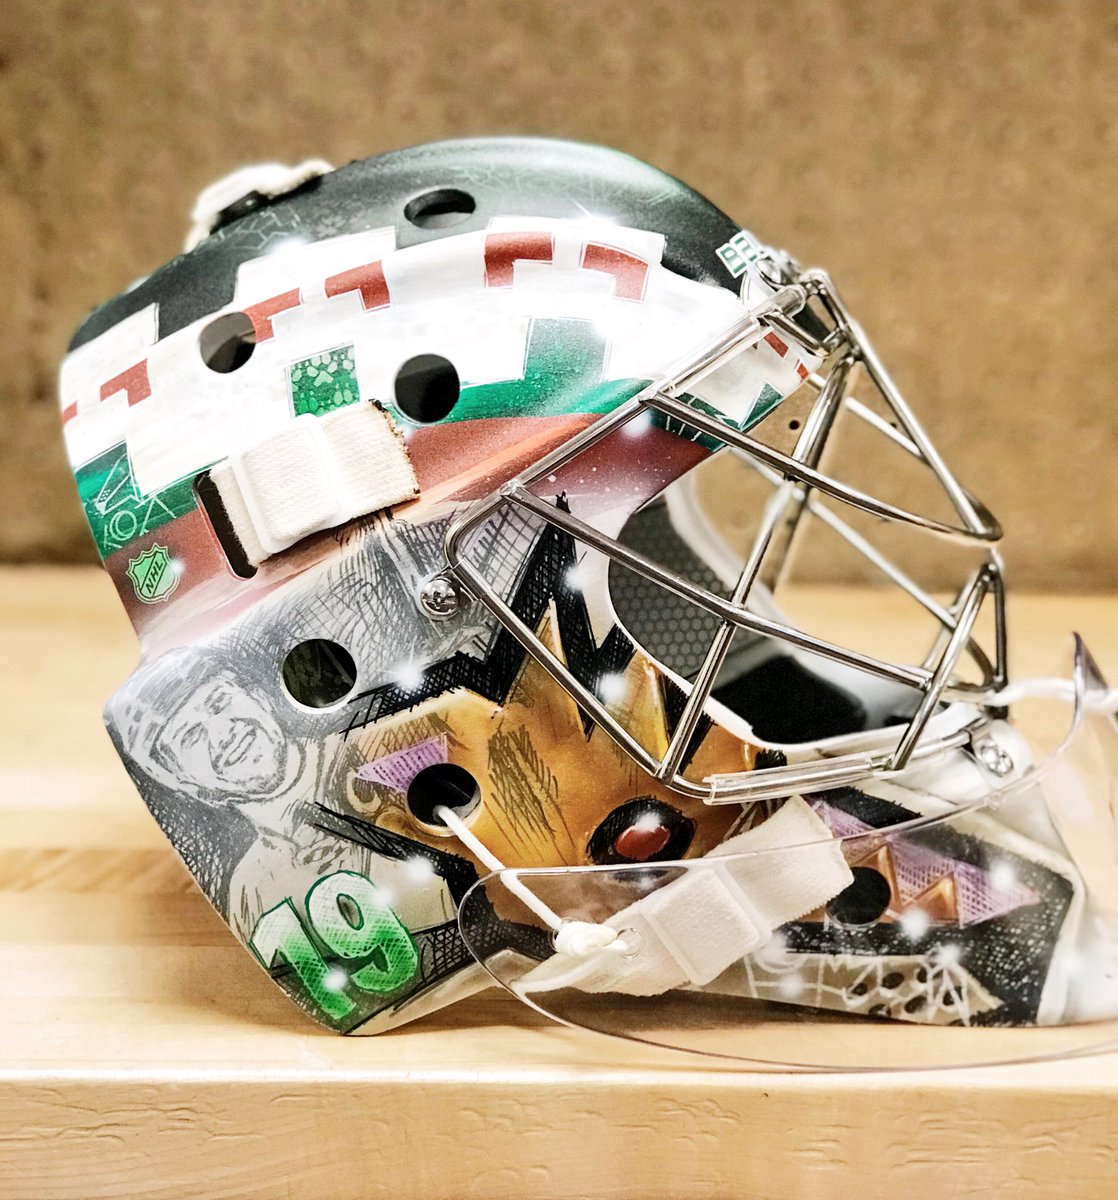 Antti Raanta will pay tribute to Shane Doan on his new Kachina helmet. 💜  We’re not crying, you’re crying. https://t.co/zwknxEBvbk